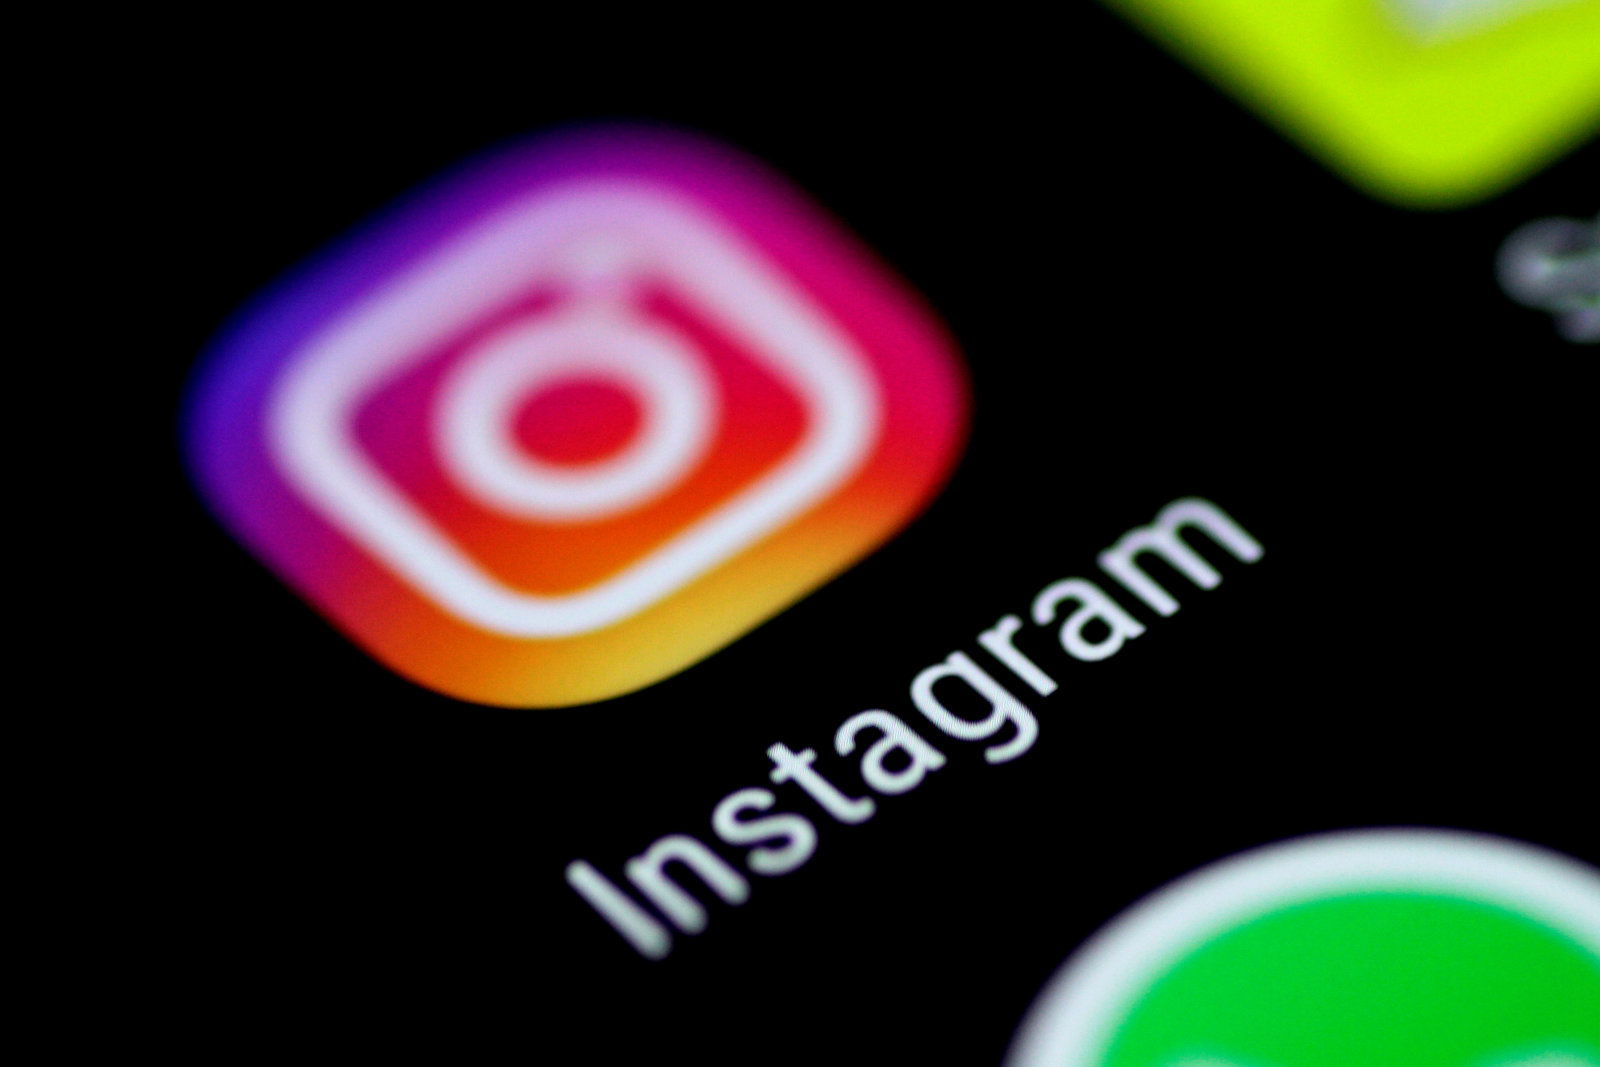 Instagram Has Its Eyes on A Feature That Allows Users to Co-Watch Videos